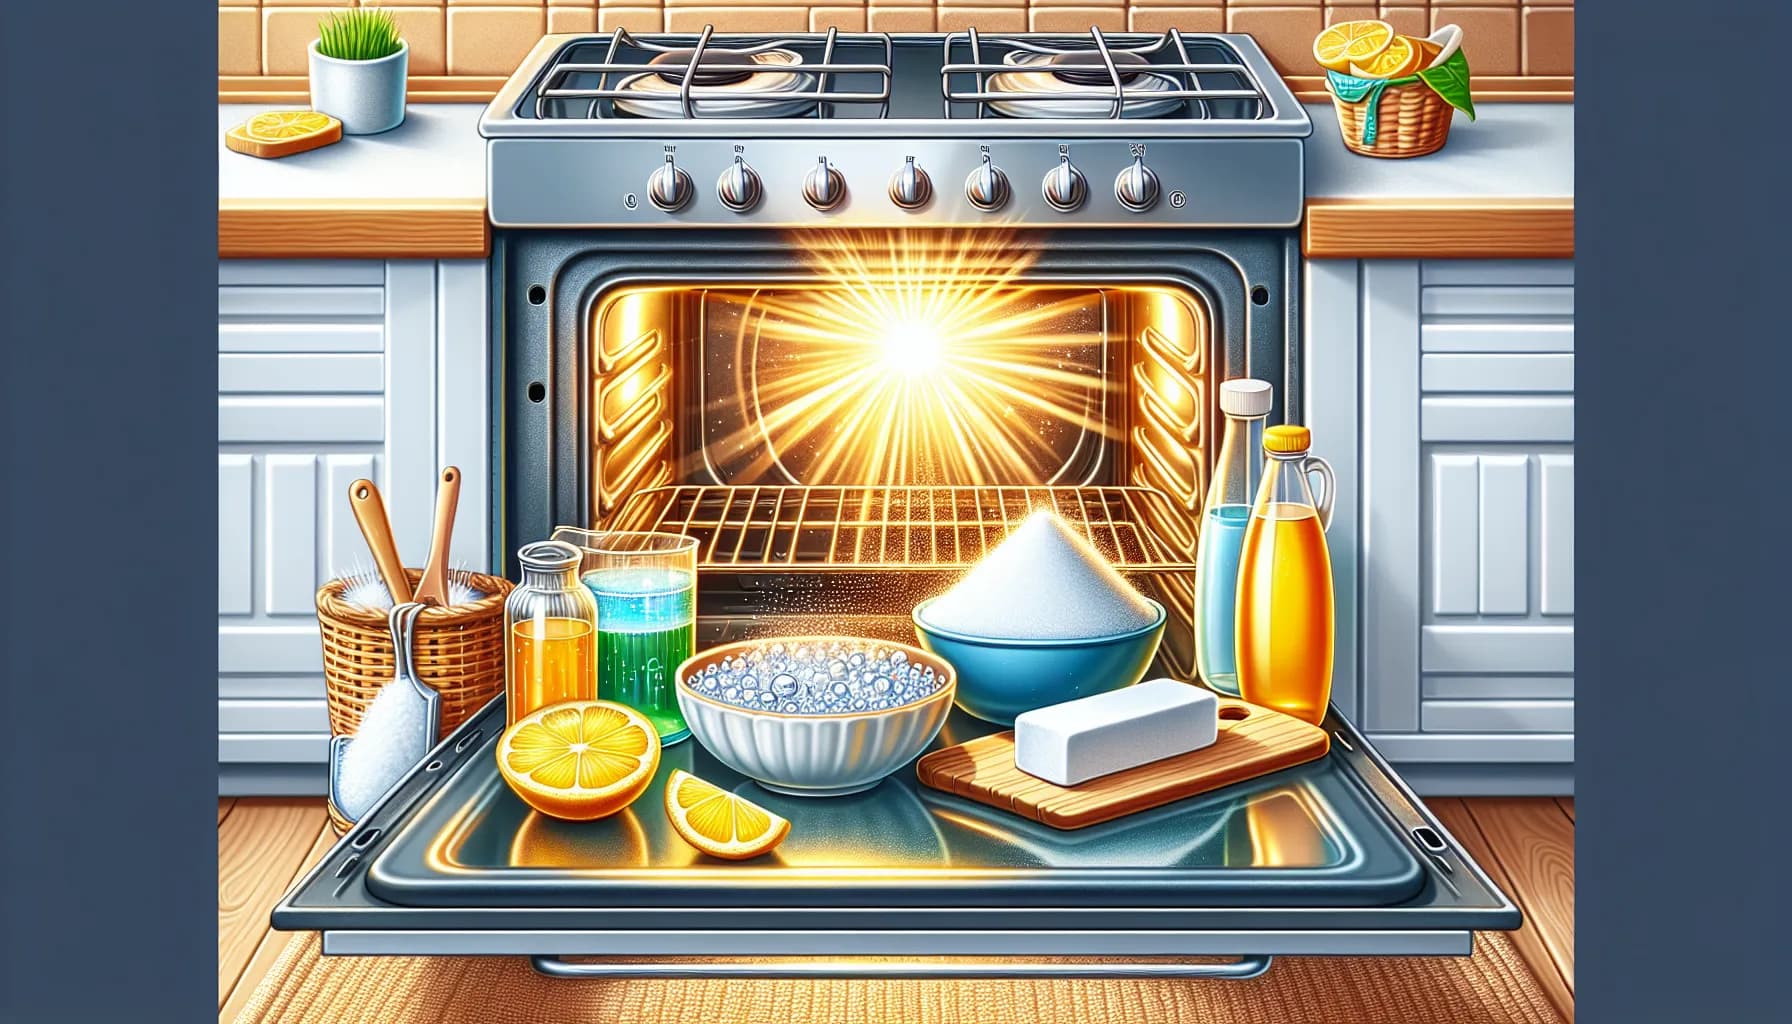 Sparkling clean oven with natural cleaning ingredients - baking soda, vinegar, lemon slices. How to clean an oven naturally.